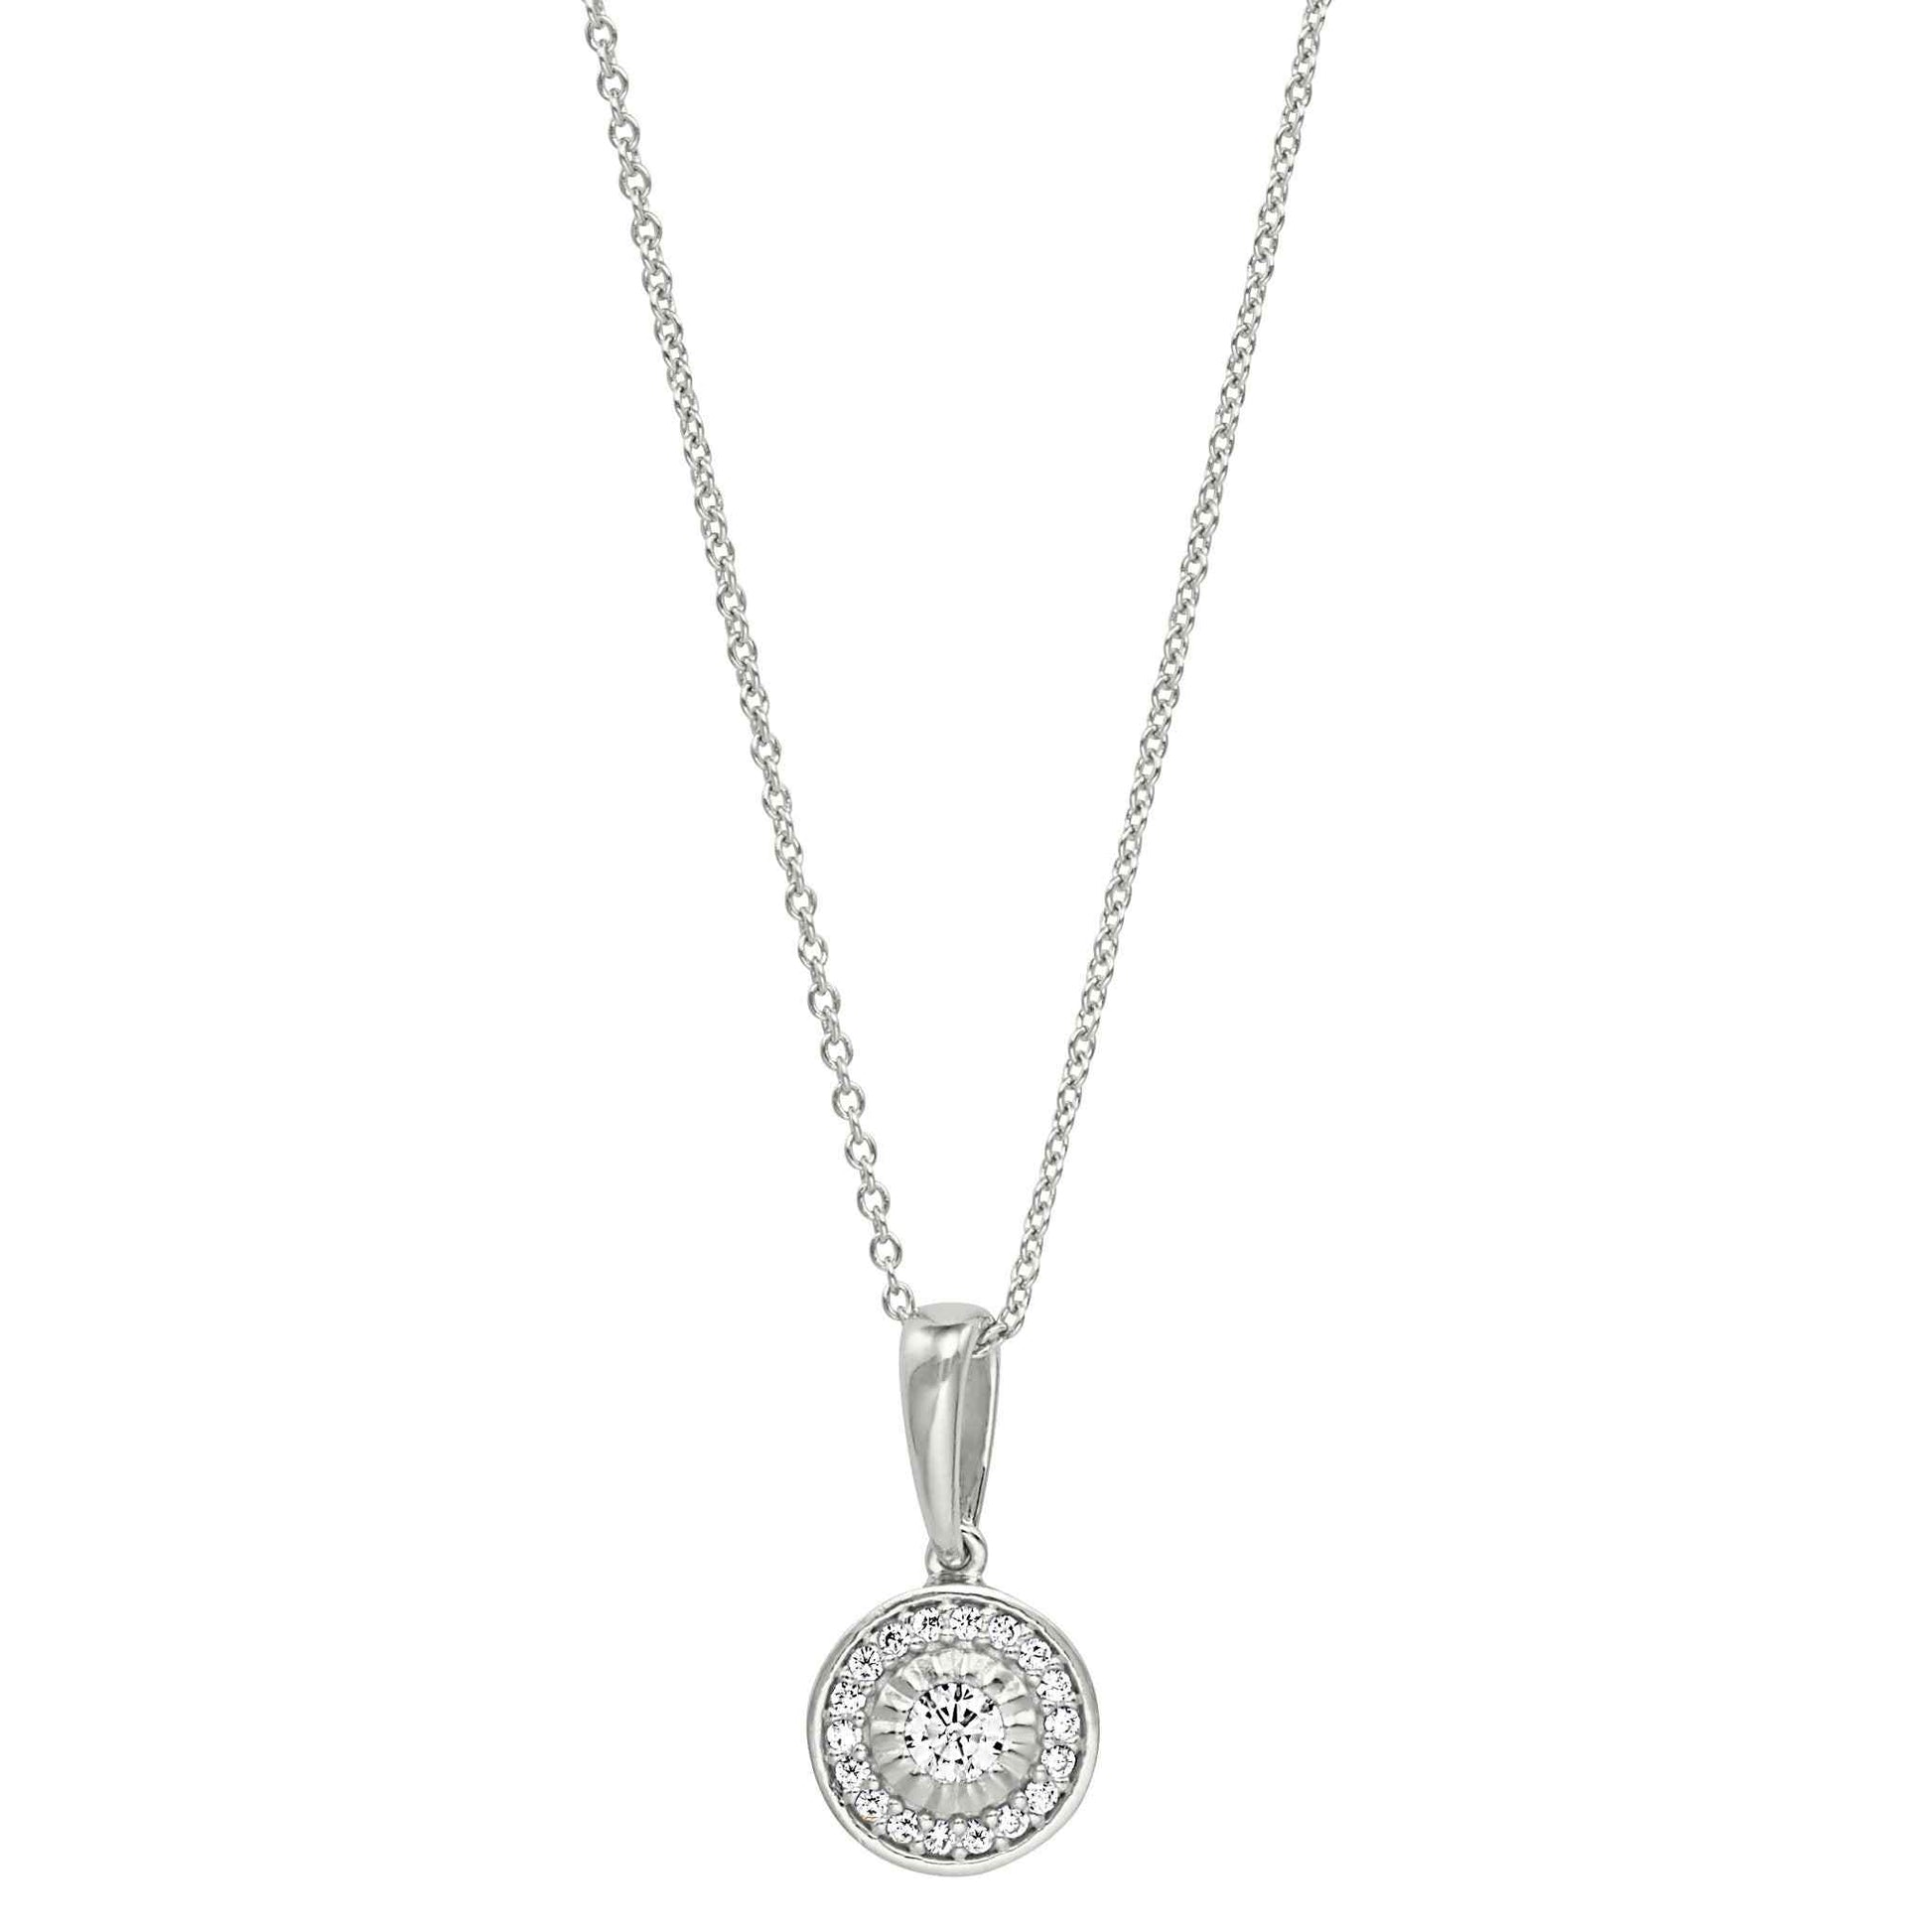 A sterling silver halo necklace with simulated diamonds displayed on a neutral white background.